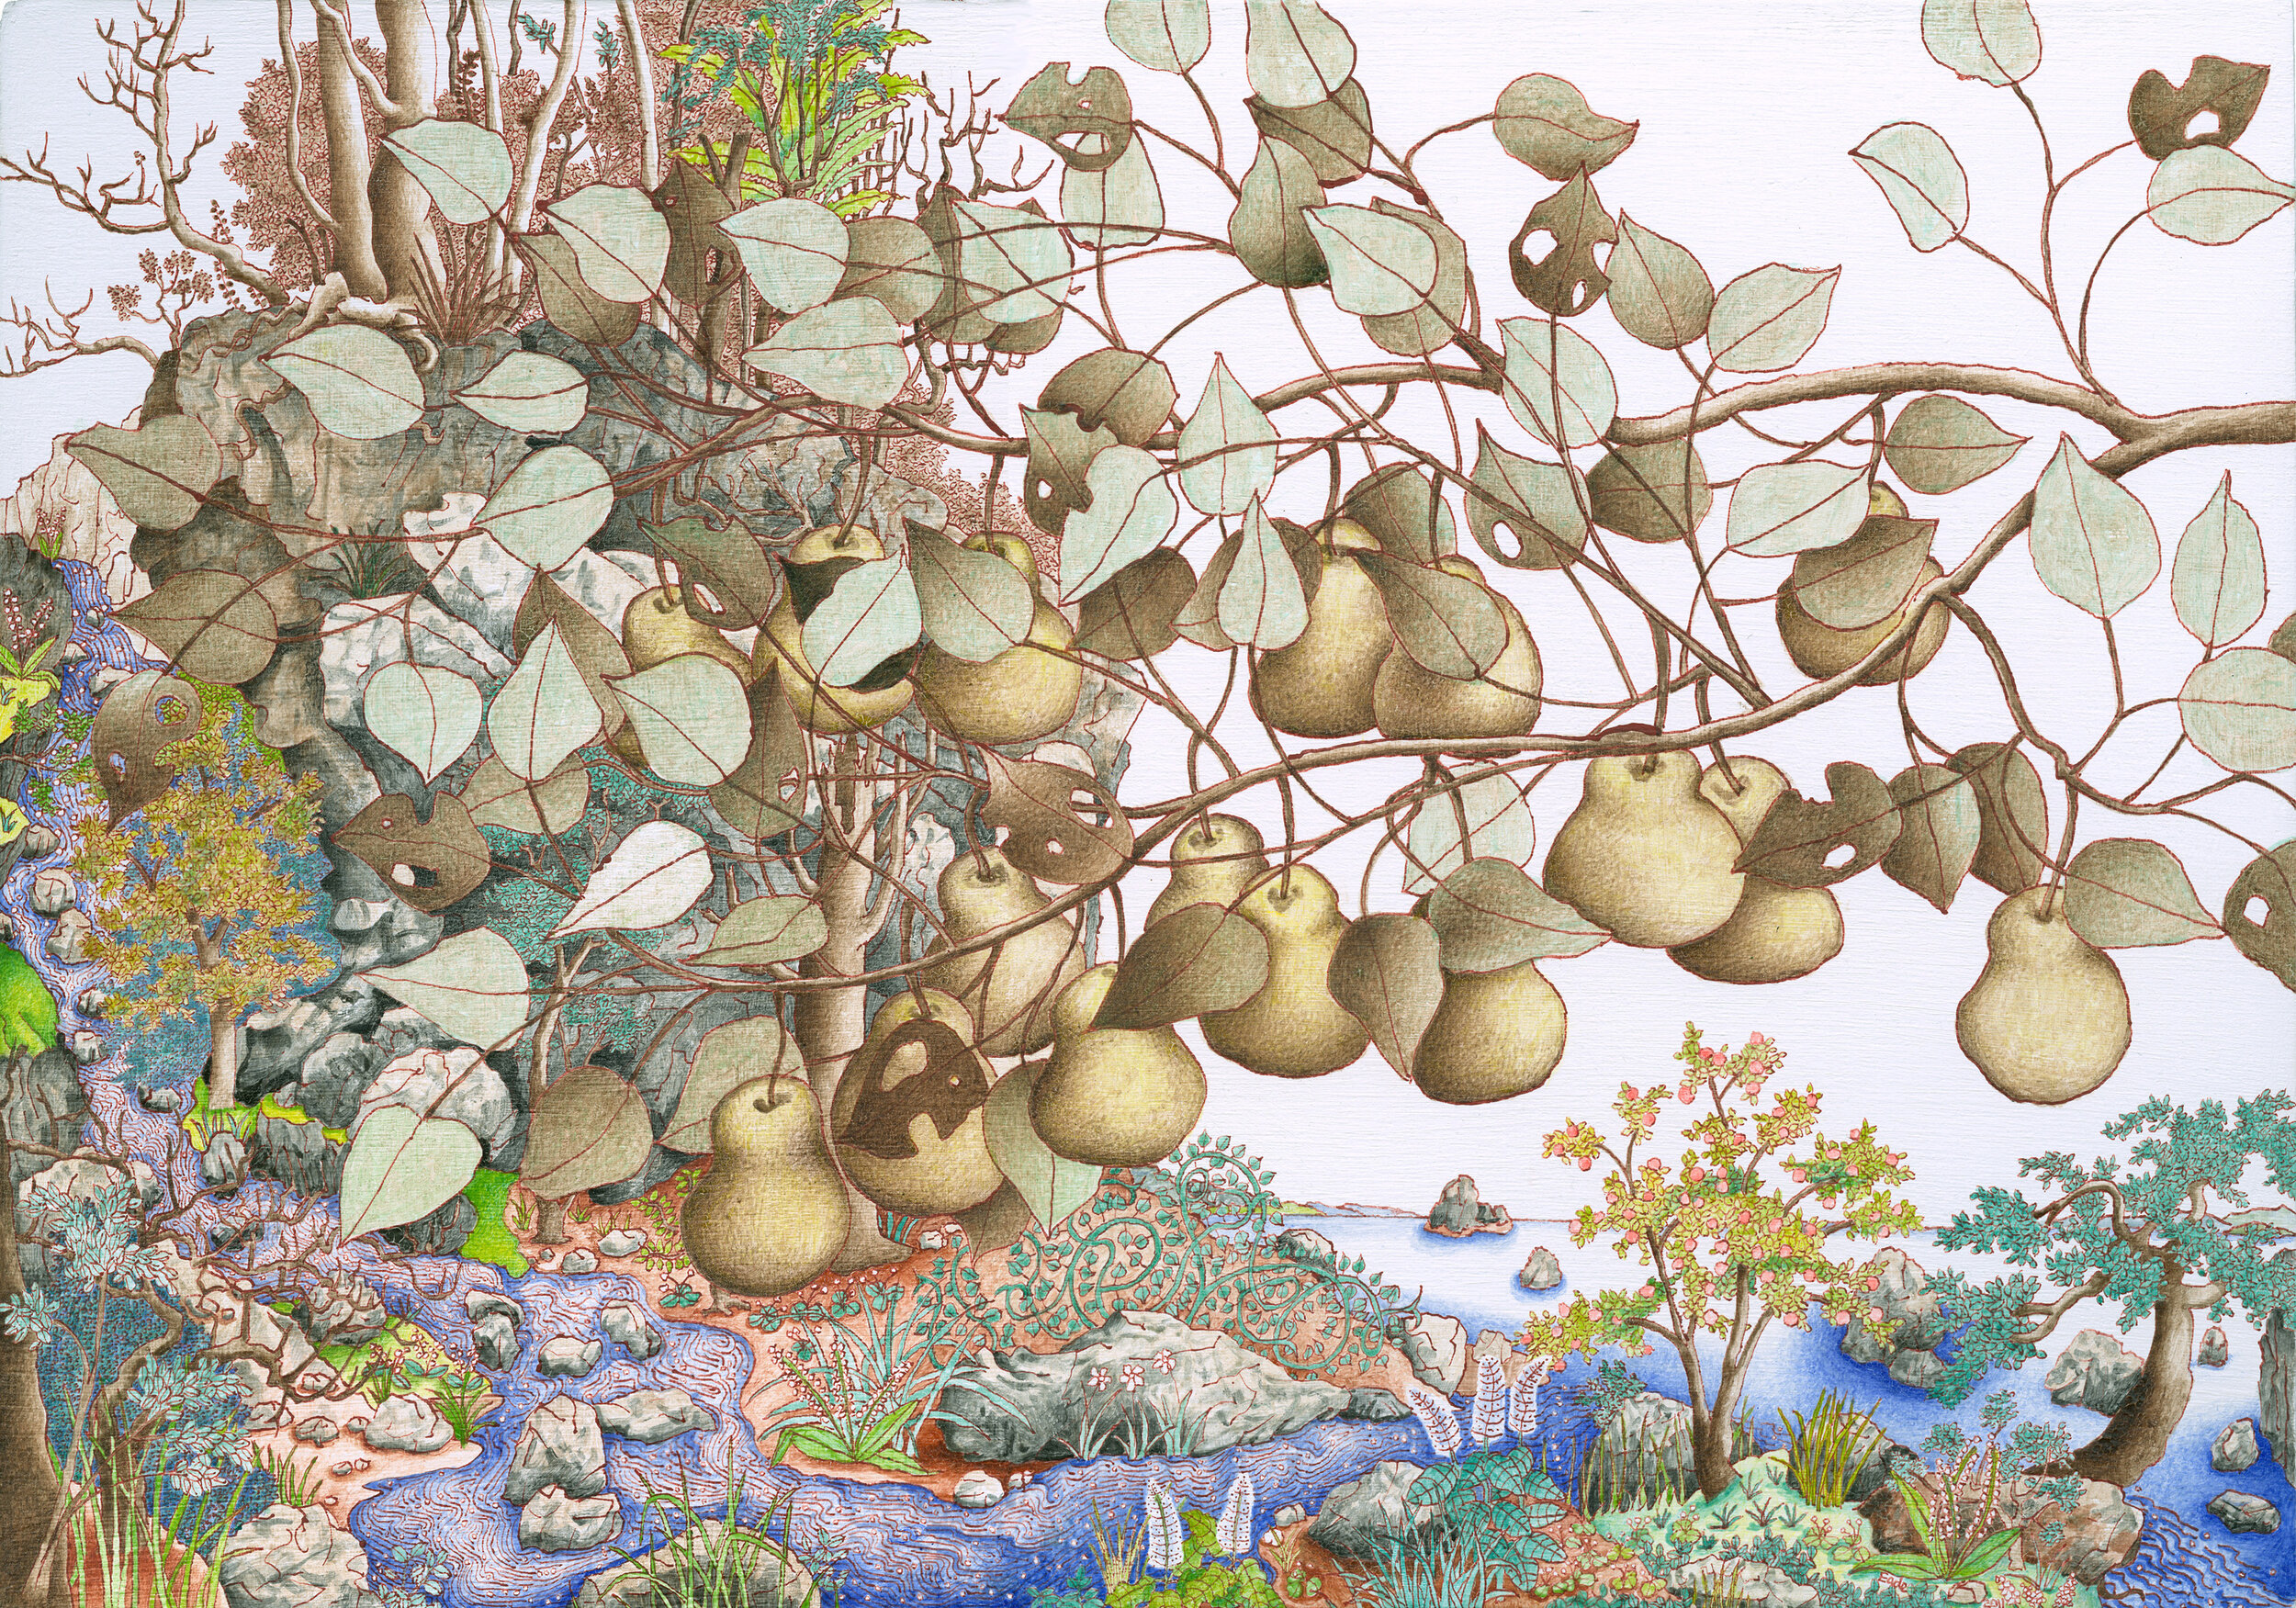  Micheal Eade.  Wild Pear Branch 野梨枝， Egg tempera on wood panels, 14 x 20 in. (35.6 x 50.8 cm), 2017. 